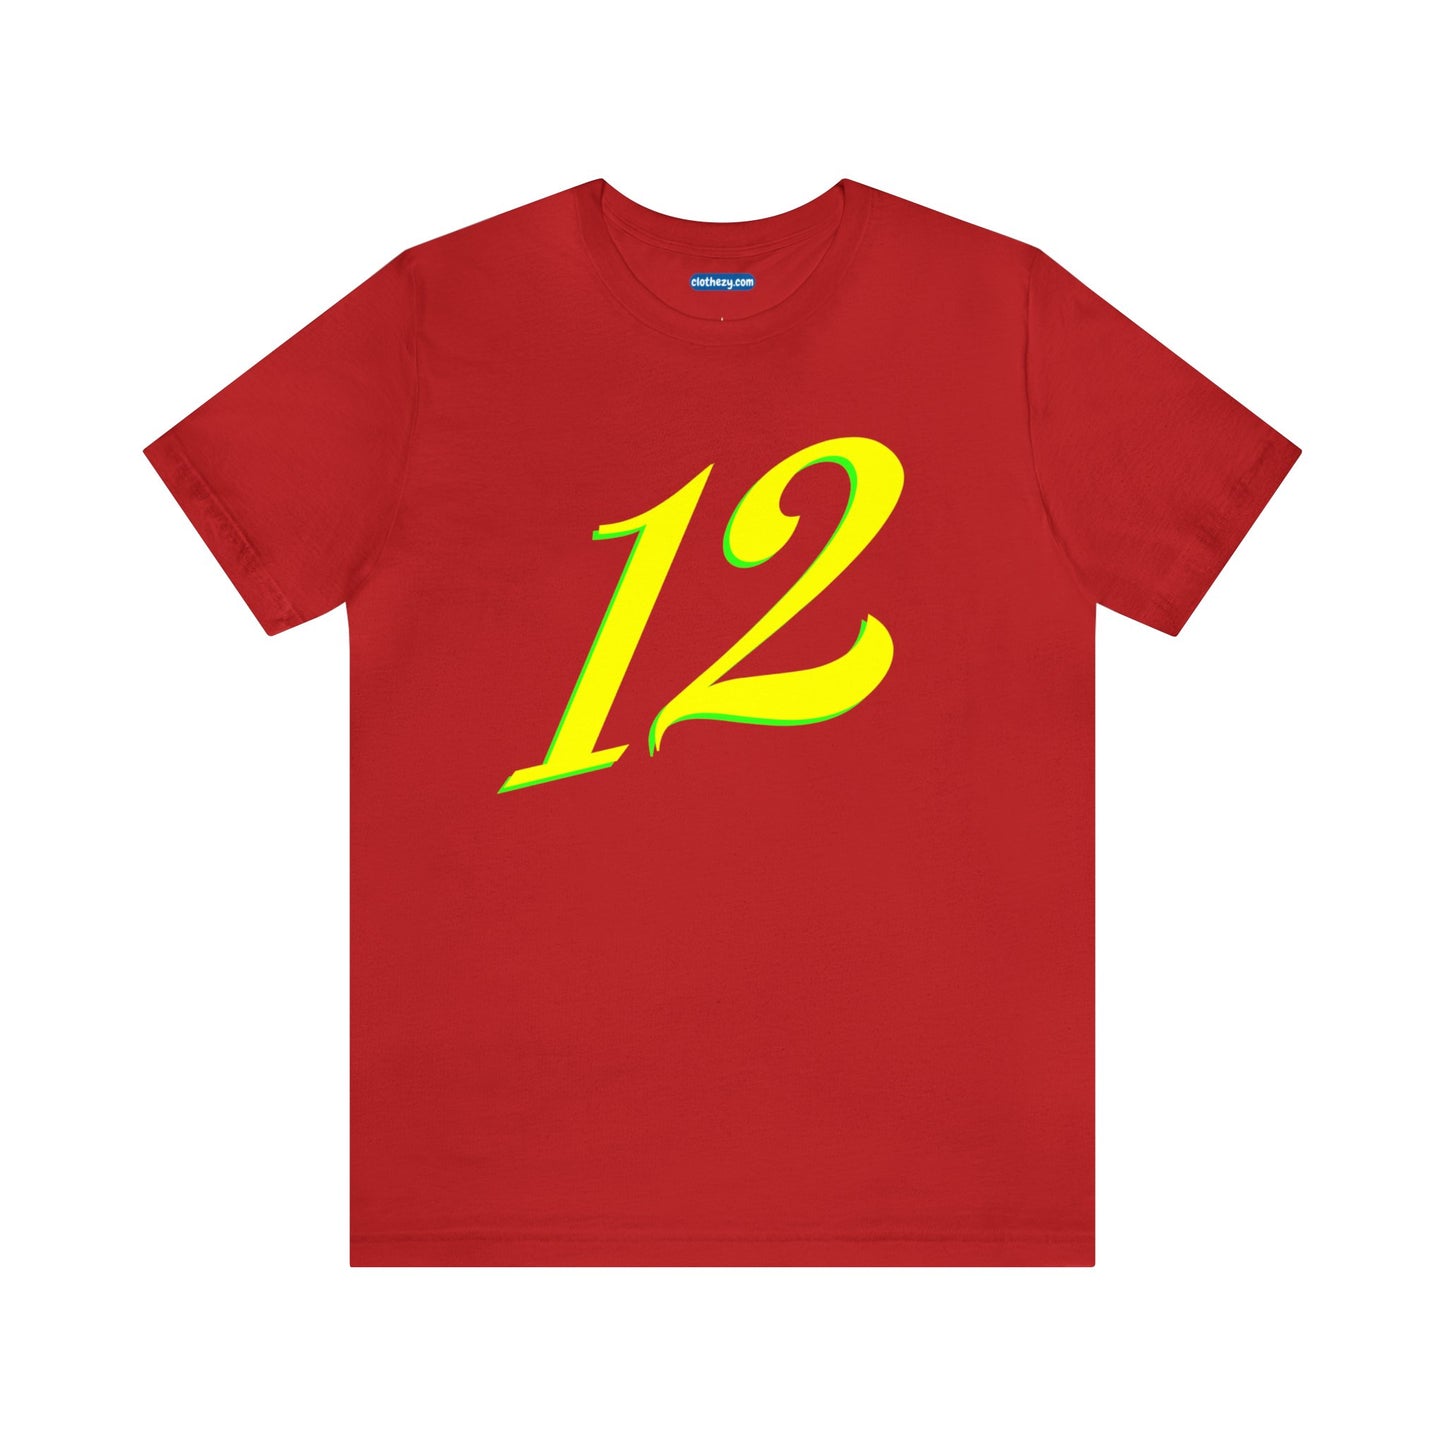 Number 12 Design - Soft Cotton Tee for birthdays and celebrations, Gift for friends and family, Multiple Options by clothezy.com in Purple Size Small - Buy Now